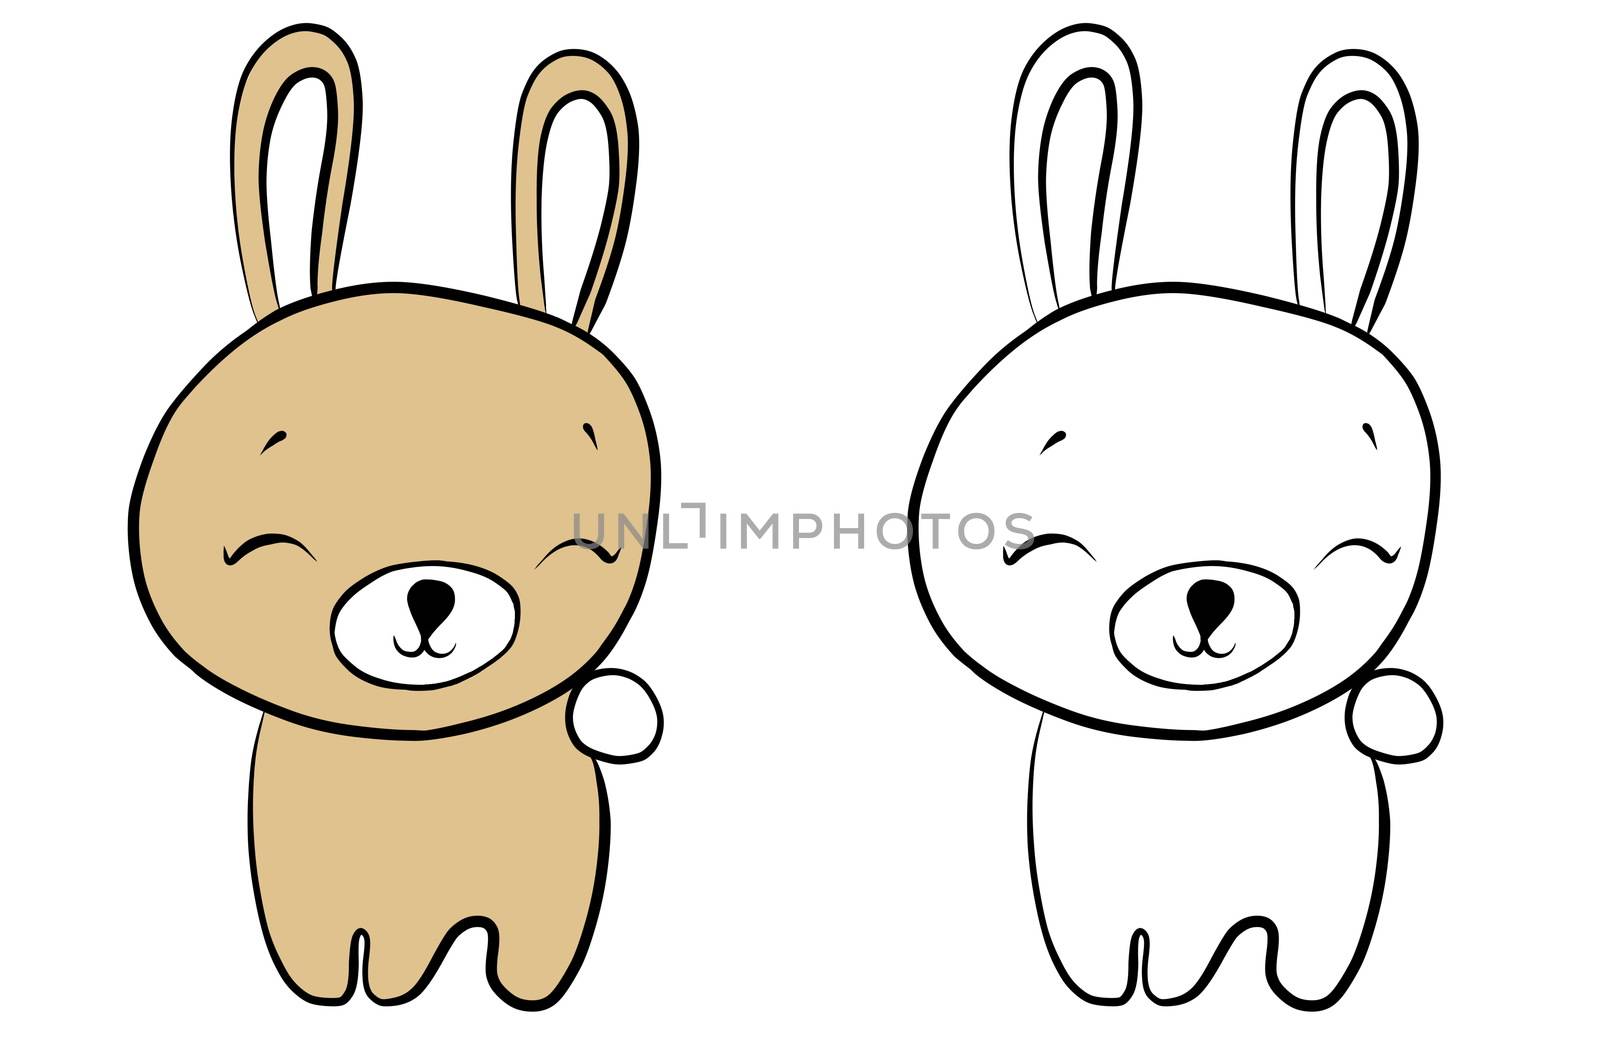 drawing of a cartoon cute toy rabbit - in color and line art, coloring page